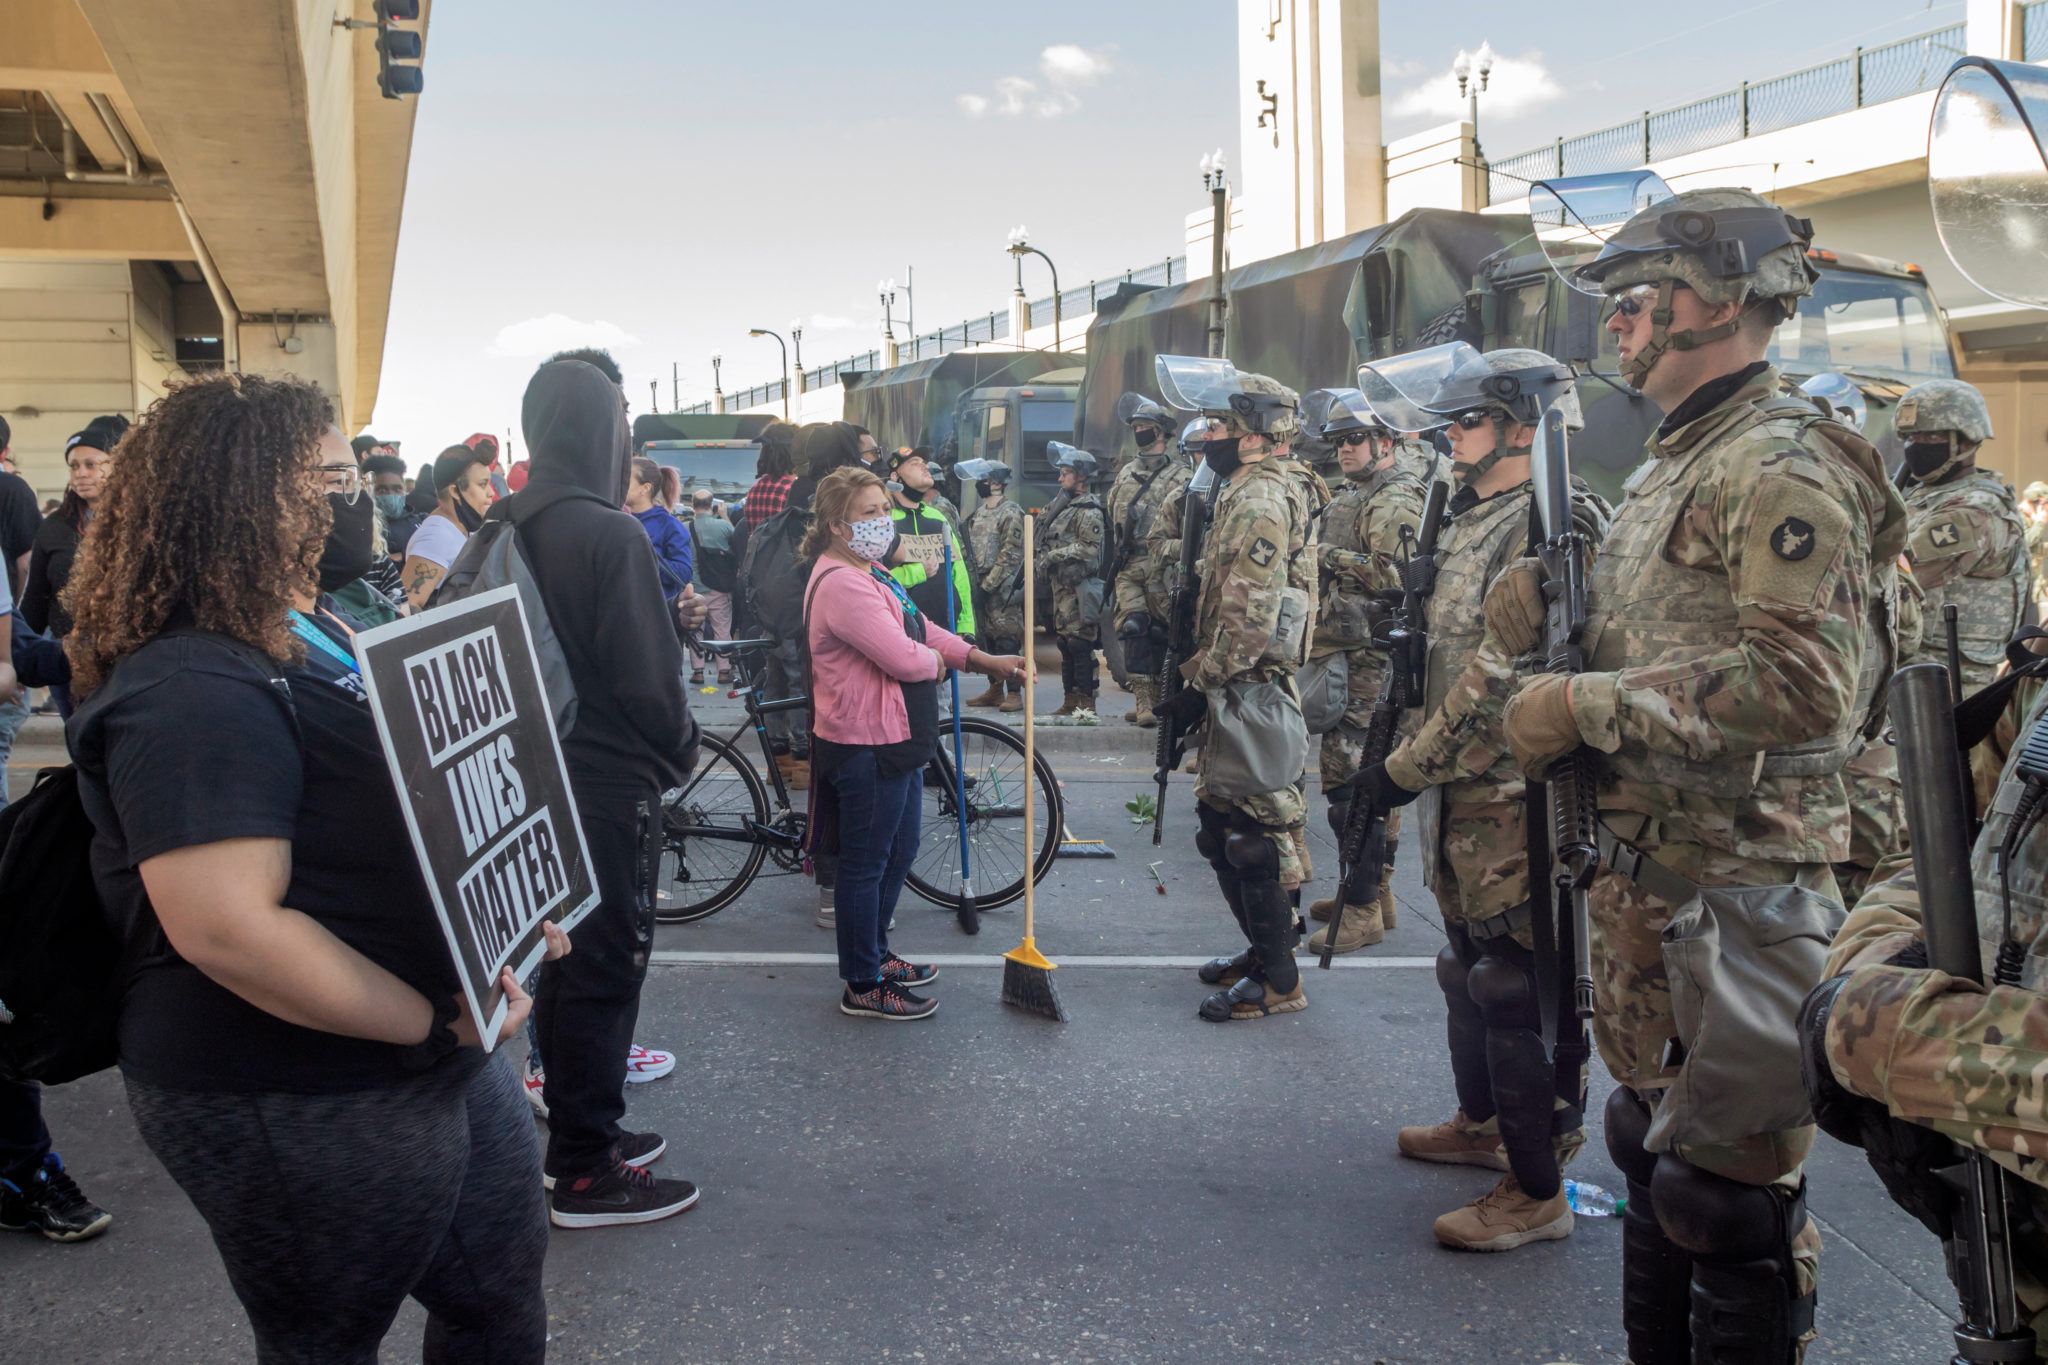 National Guard in Minneapolis – Mass, Coordinated Action Needed to ...